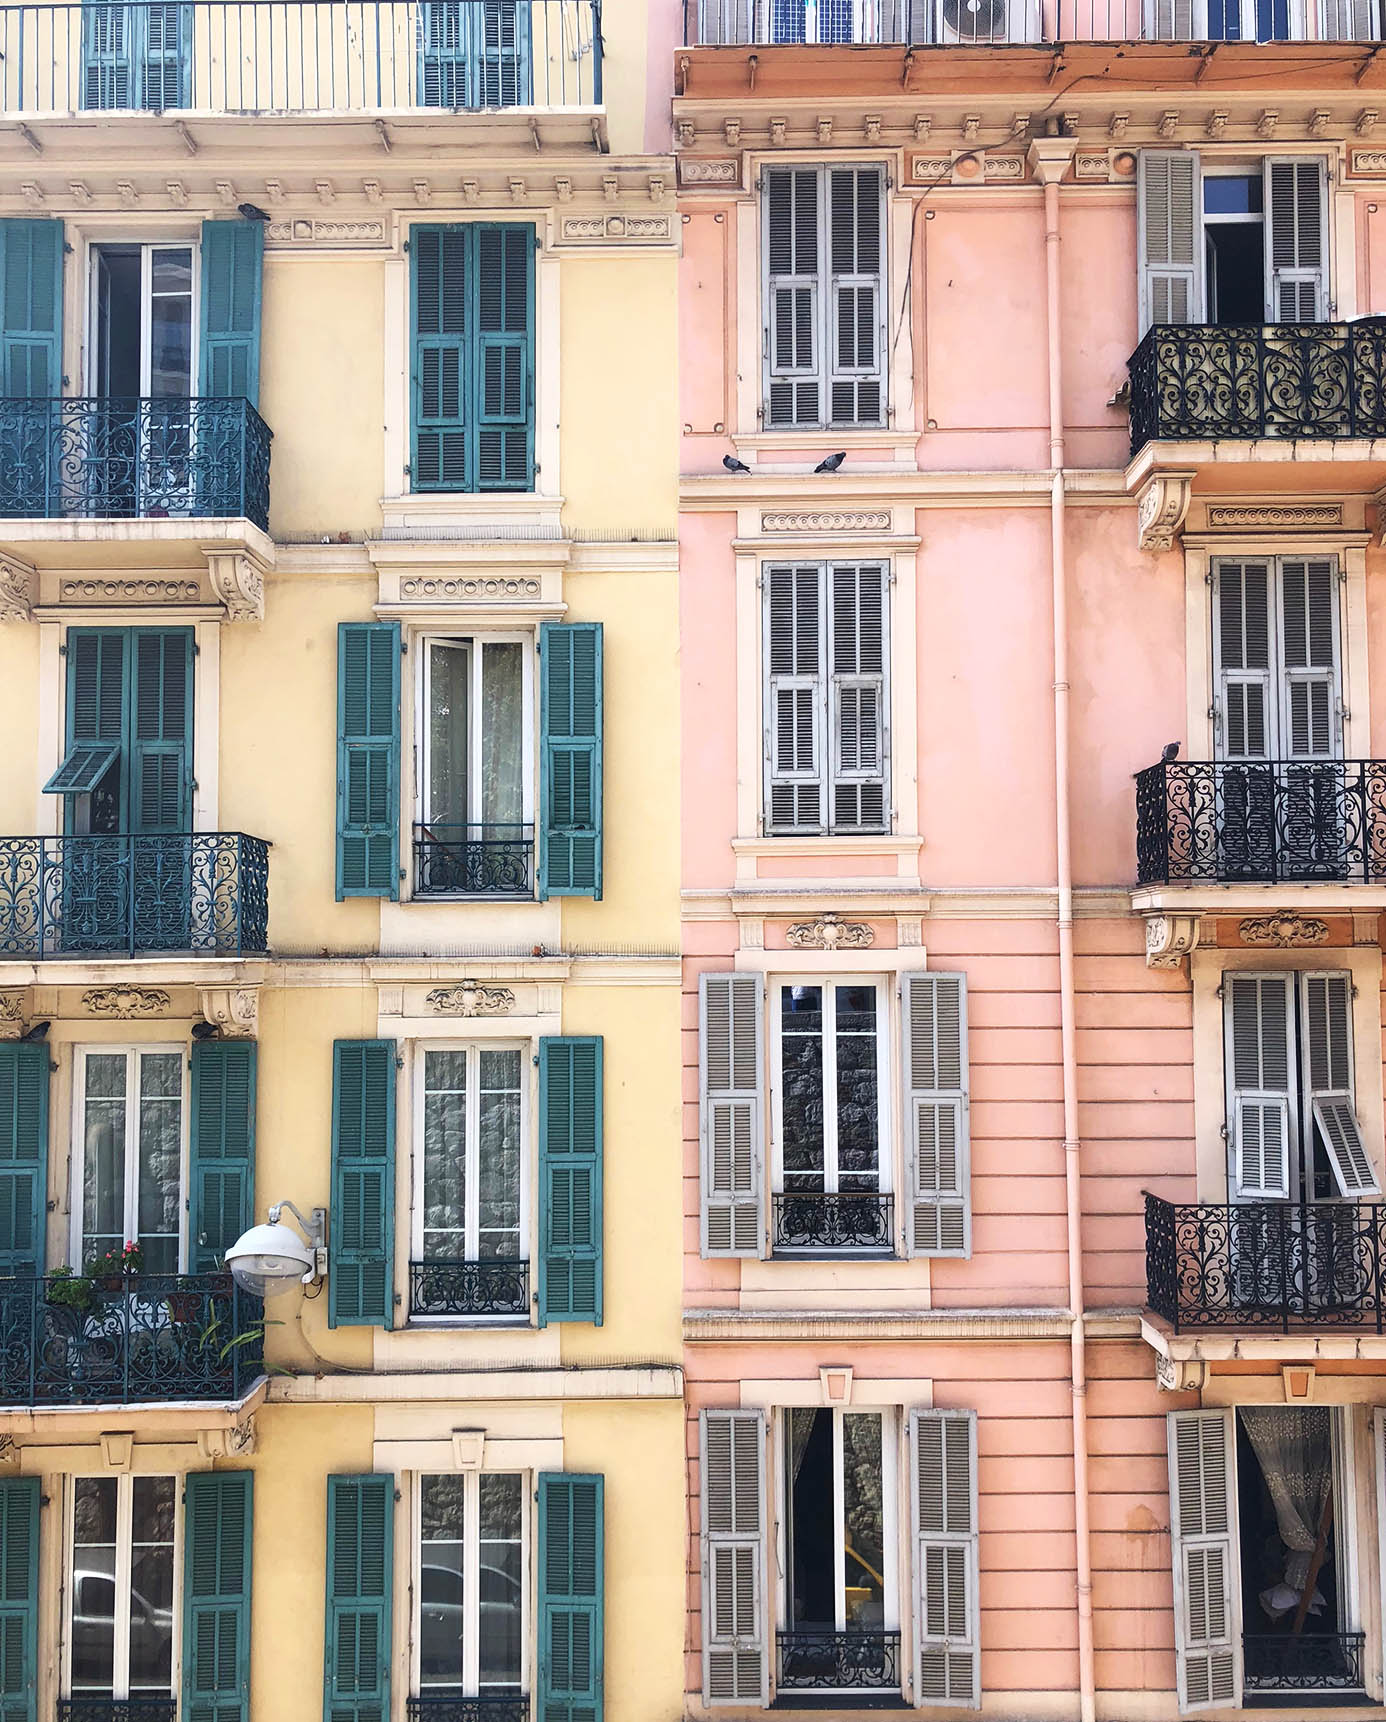 Pastel architecture in Nice, France